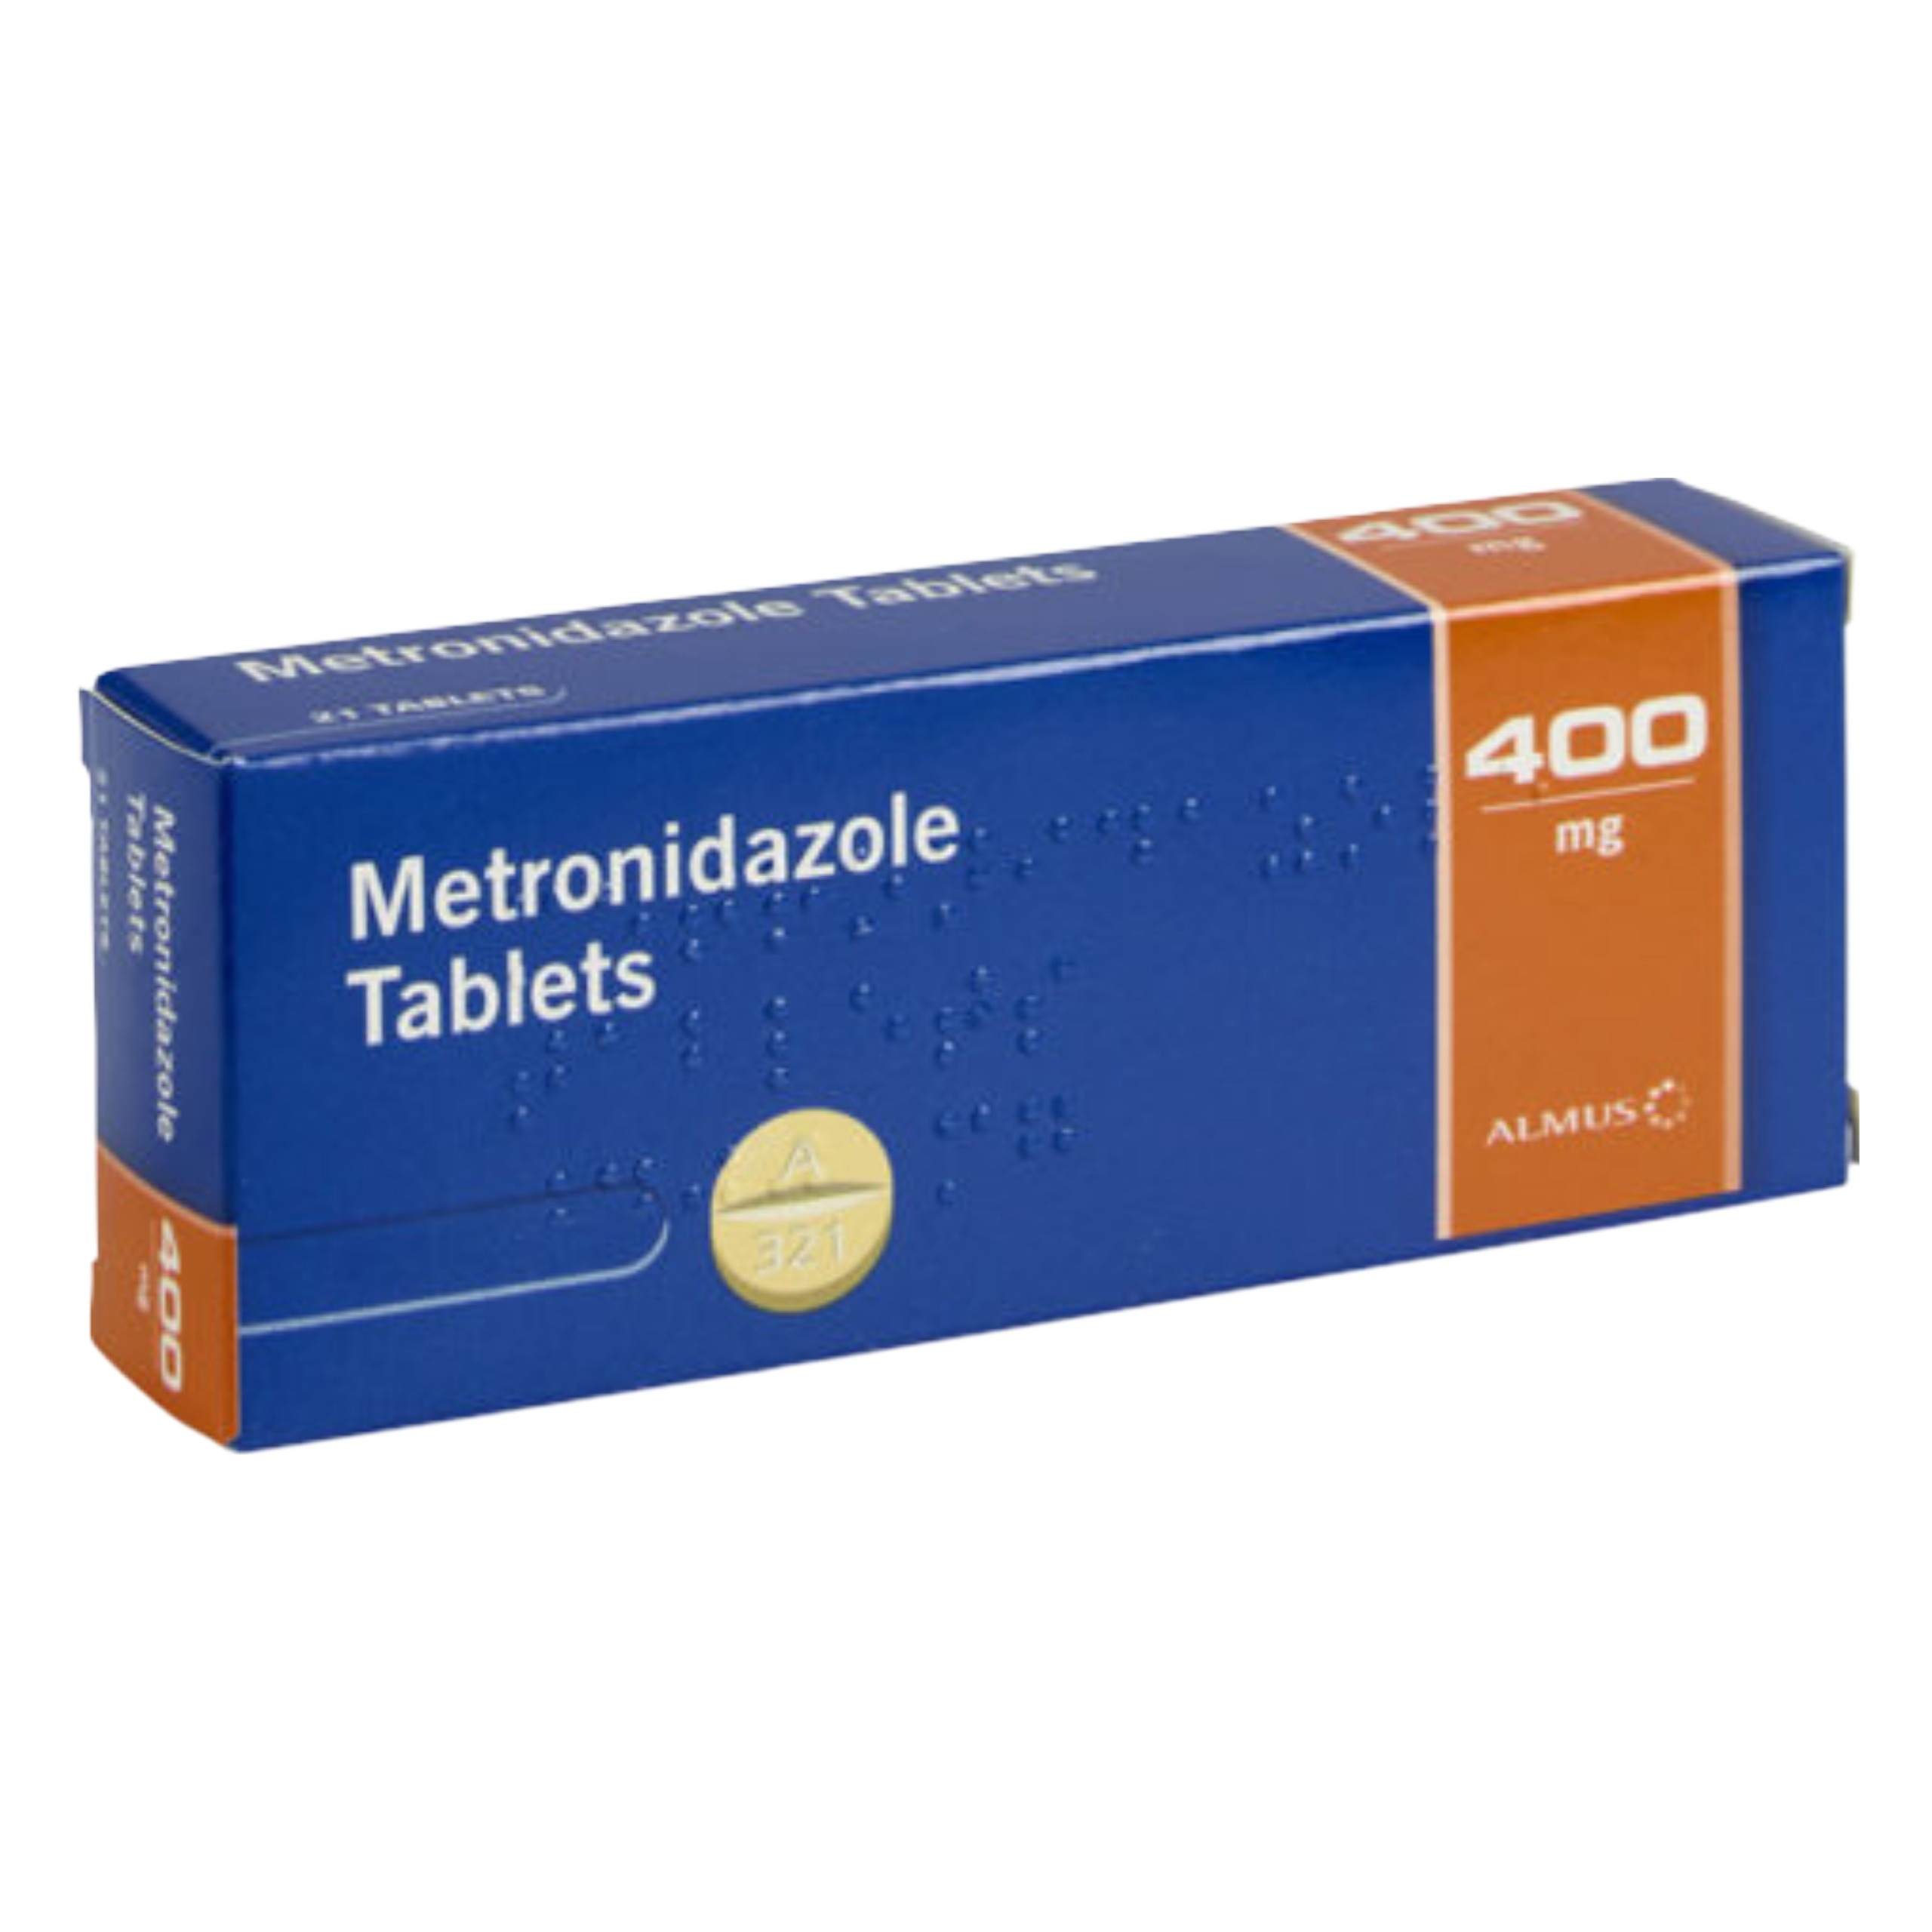 Metronidazole 400mg Tablets